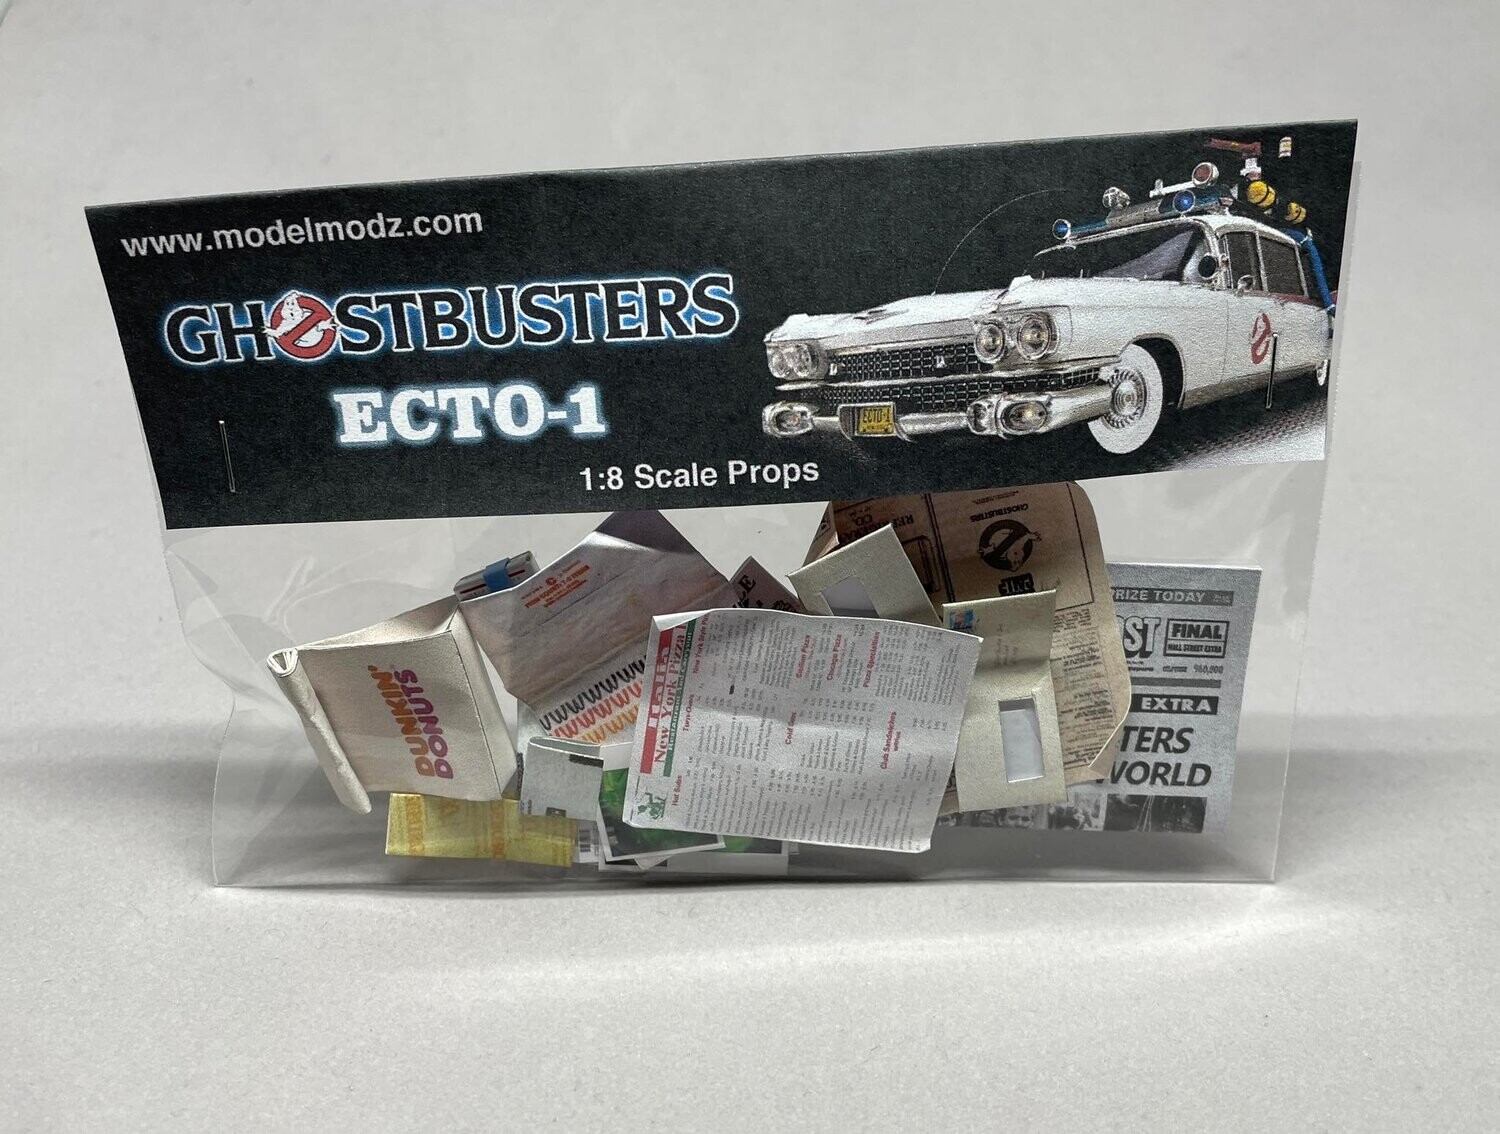 Ghostbusters 1:8 Scale Ecto-1 Miniature Paper Props (pack 3)